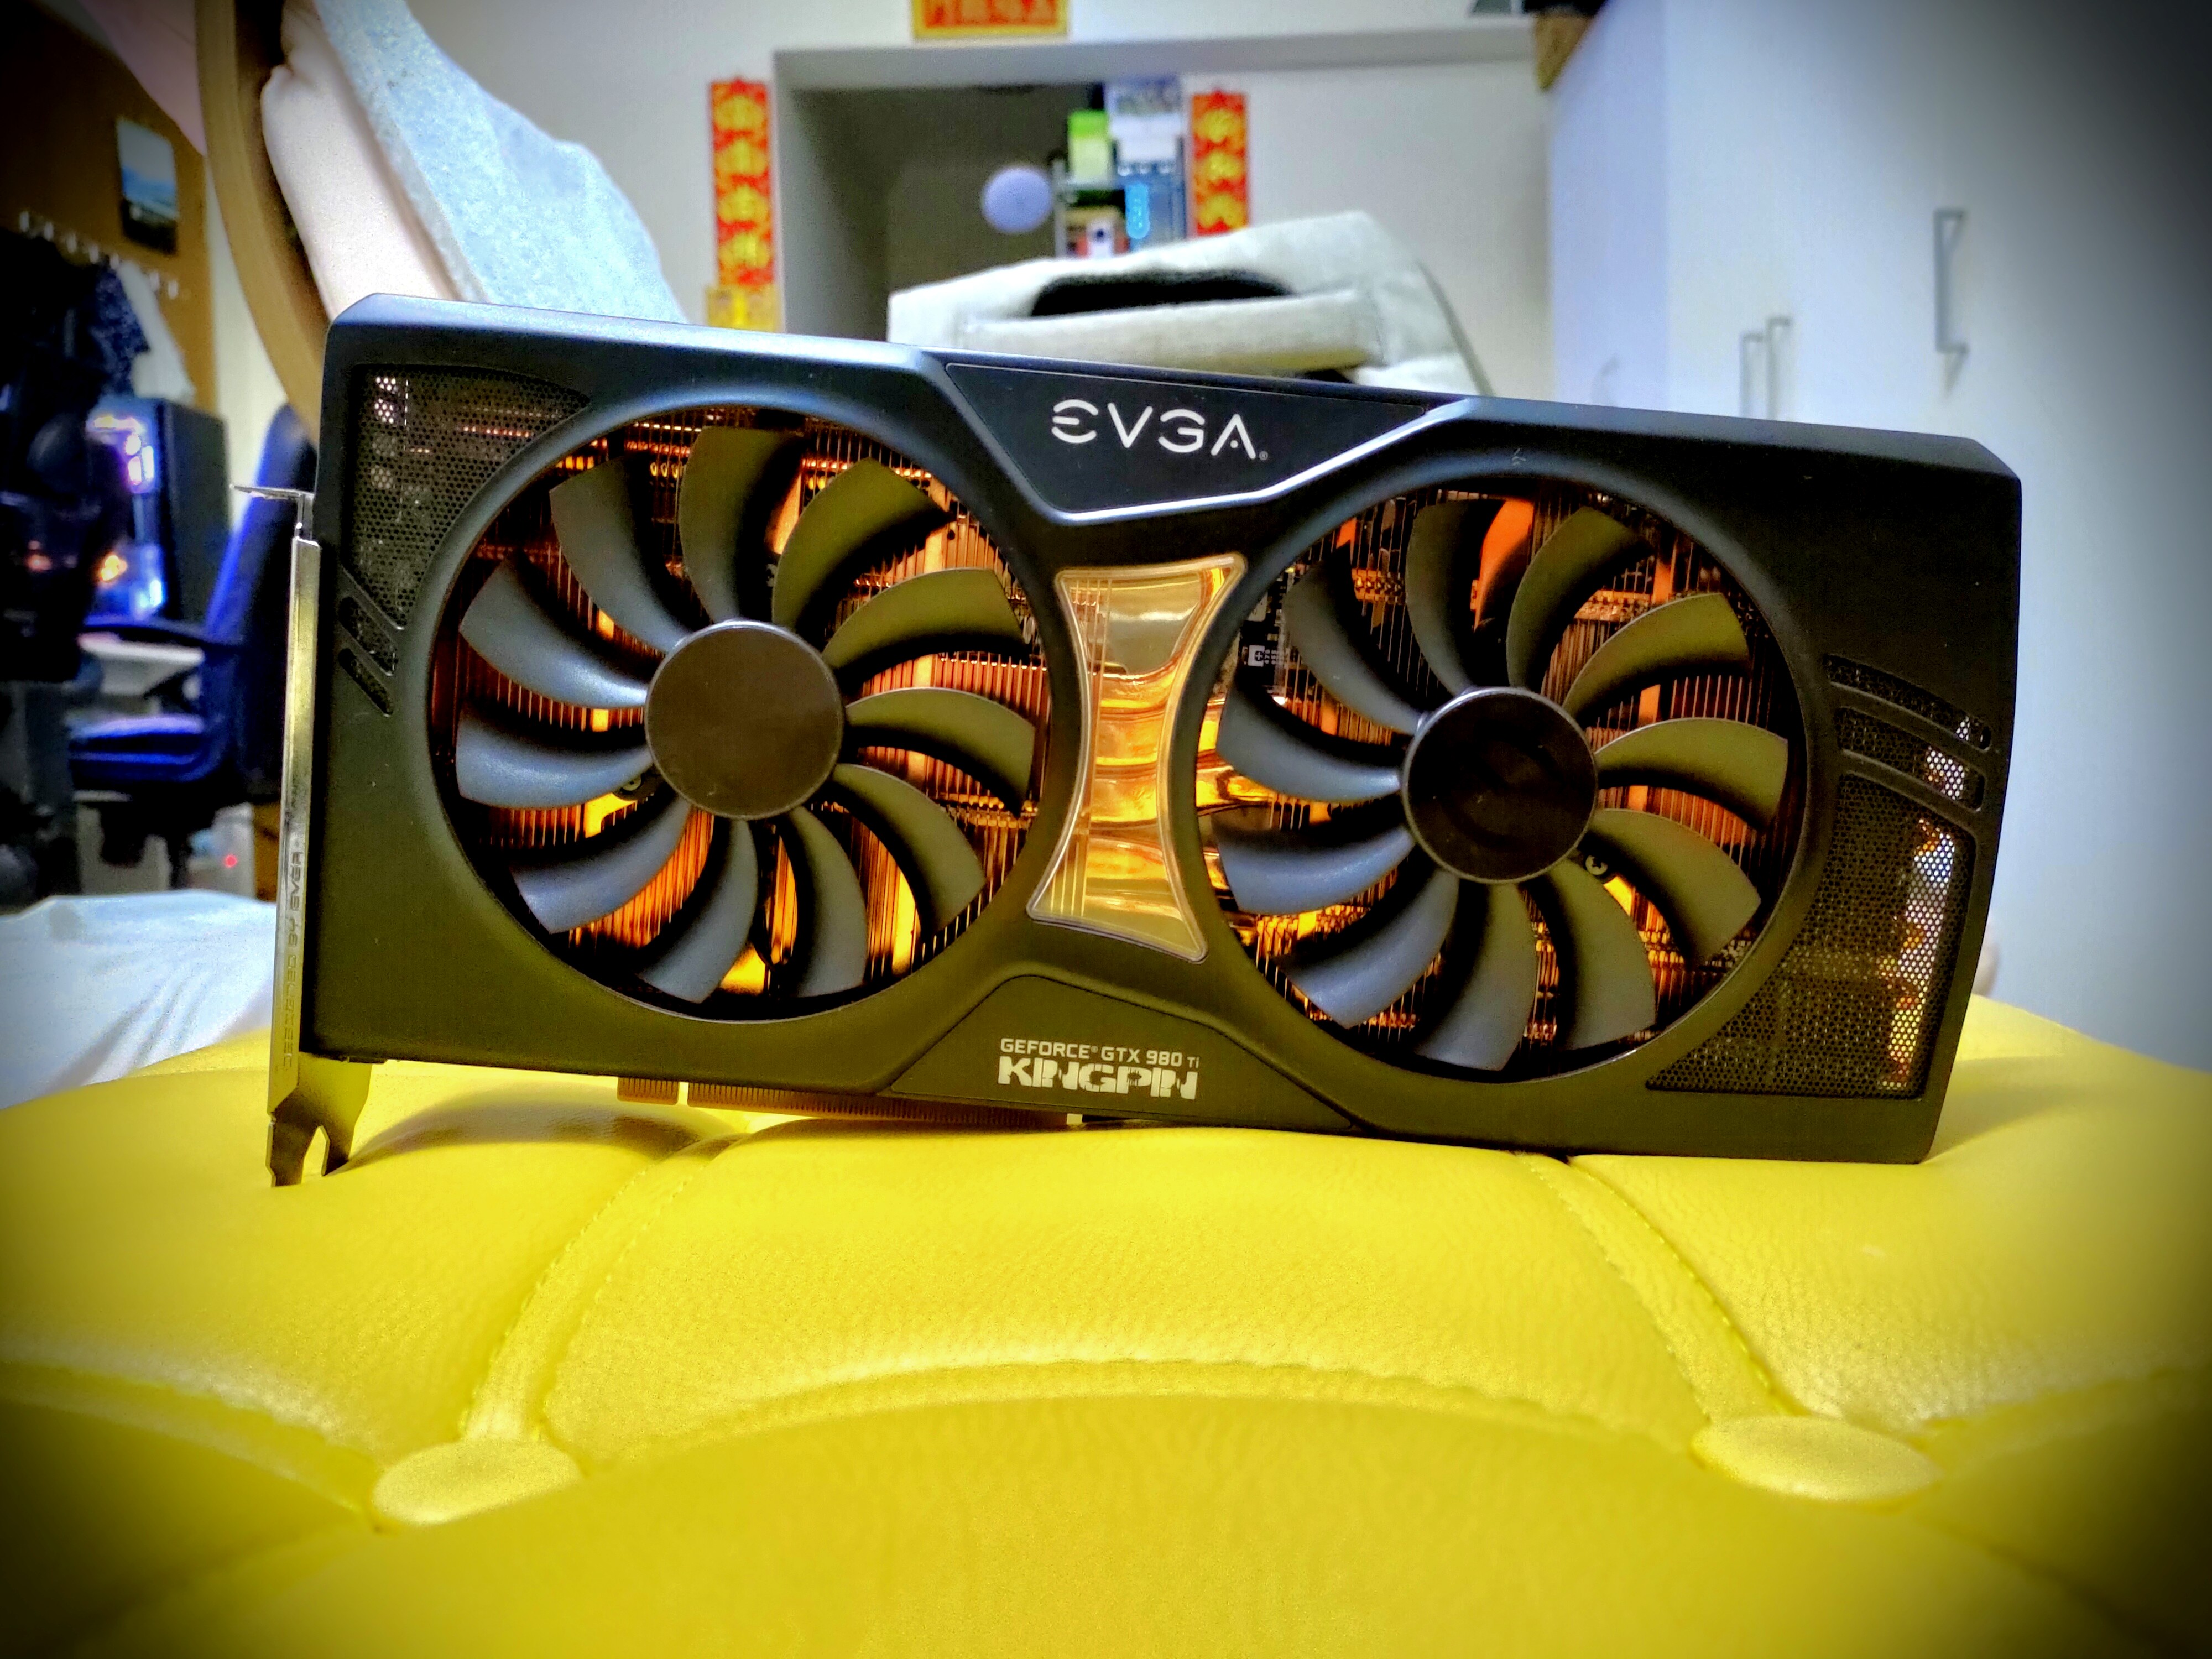 EVGA GeForce GTX 980 Ti Kingpin Edition, Computers  Tech, Parts   Accessories, Computer Parts on Carousell